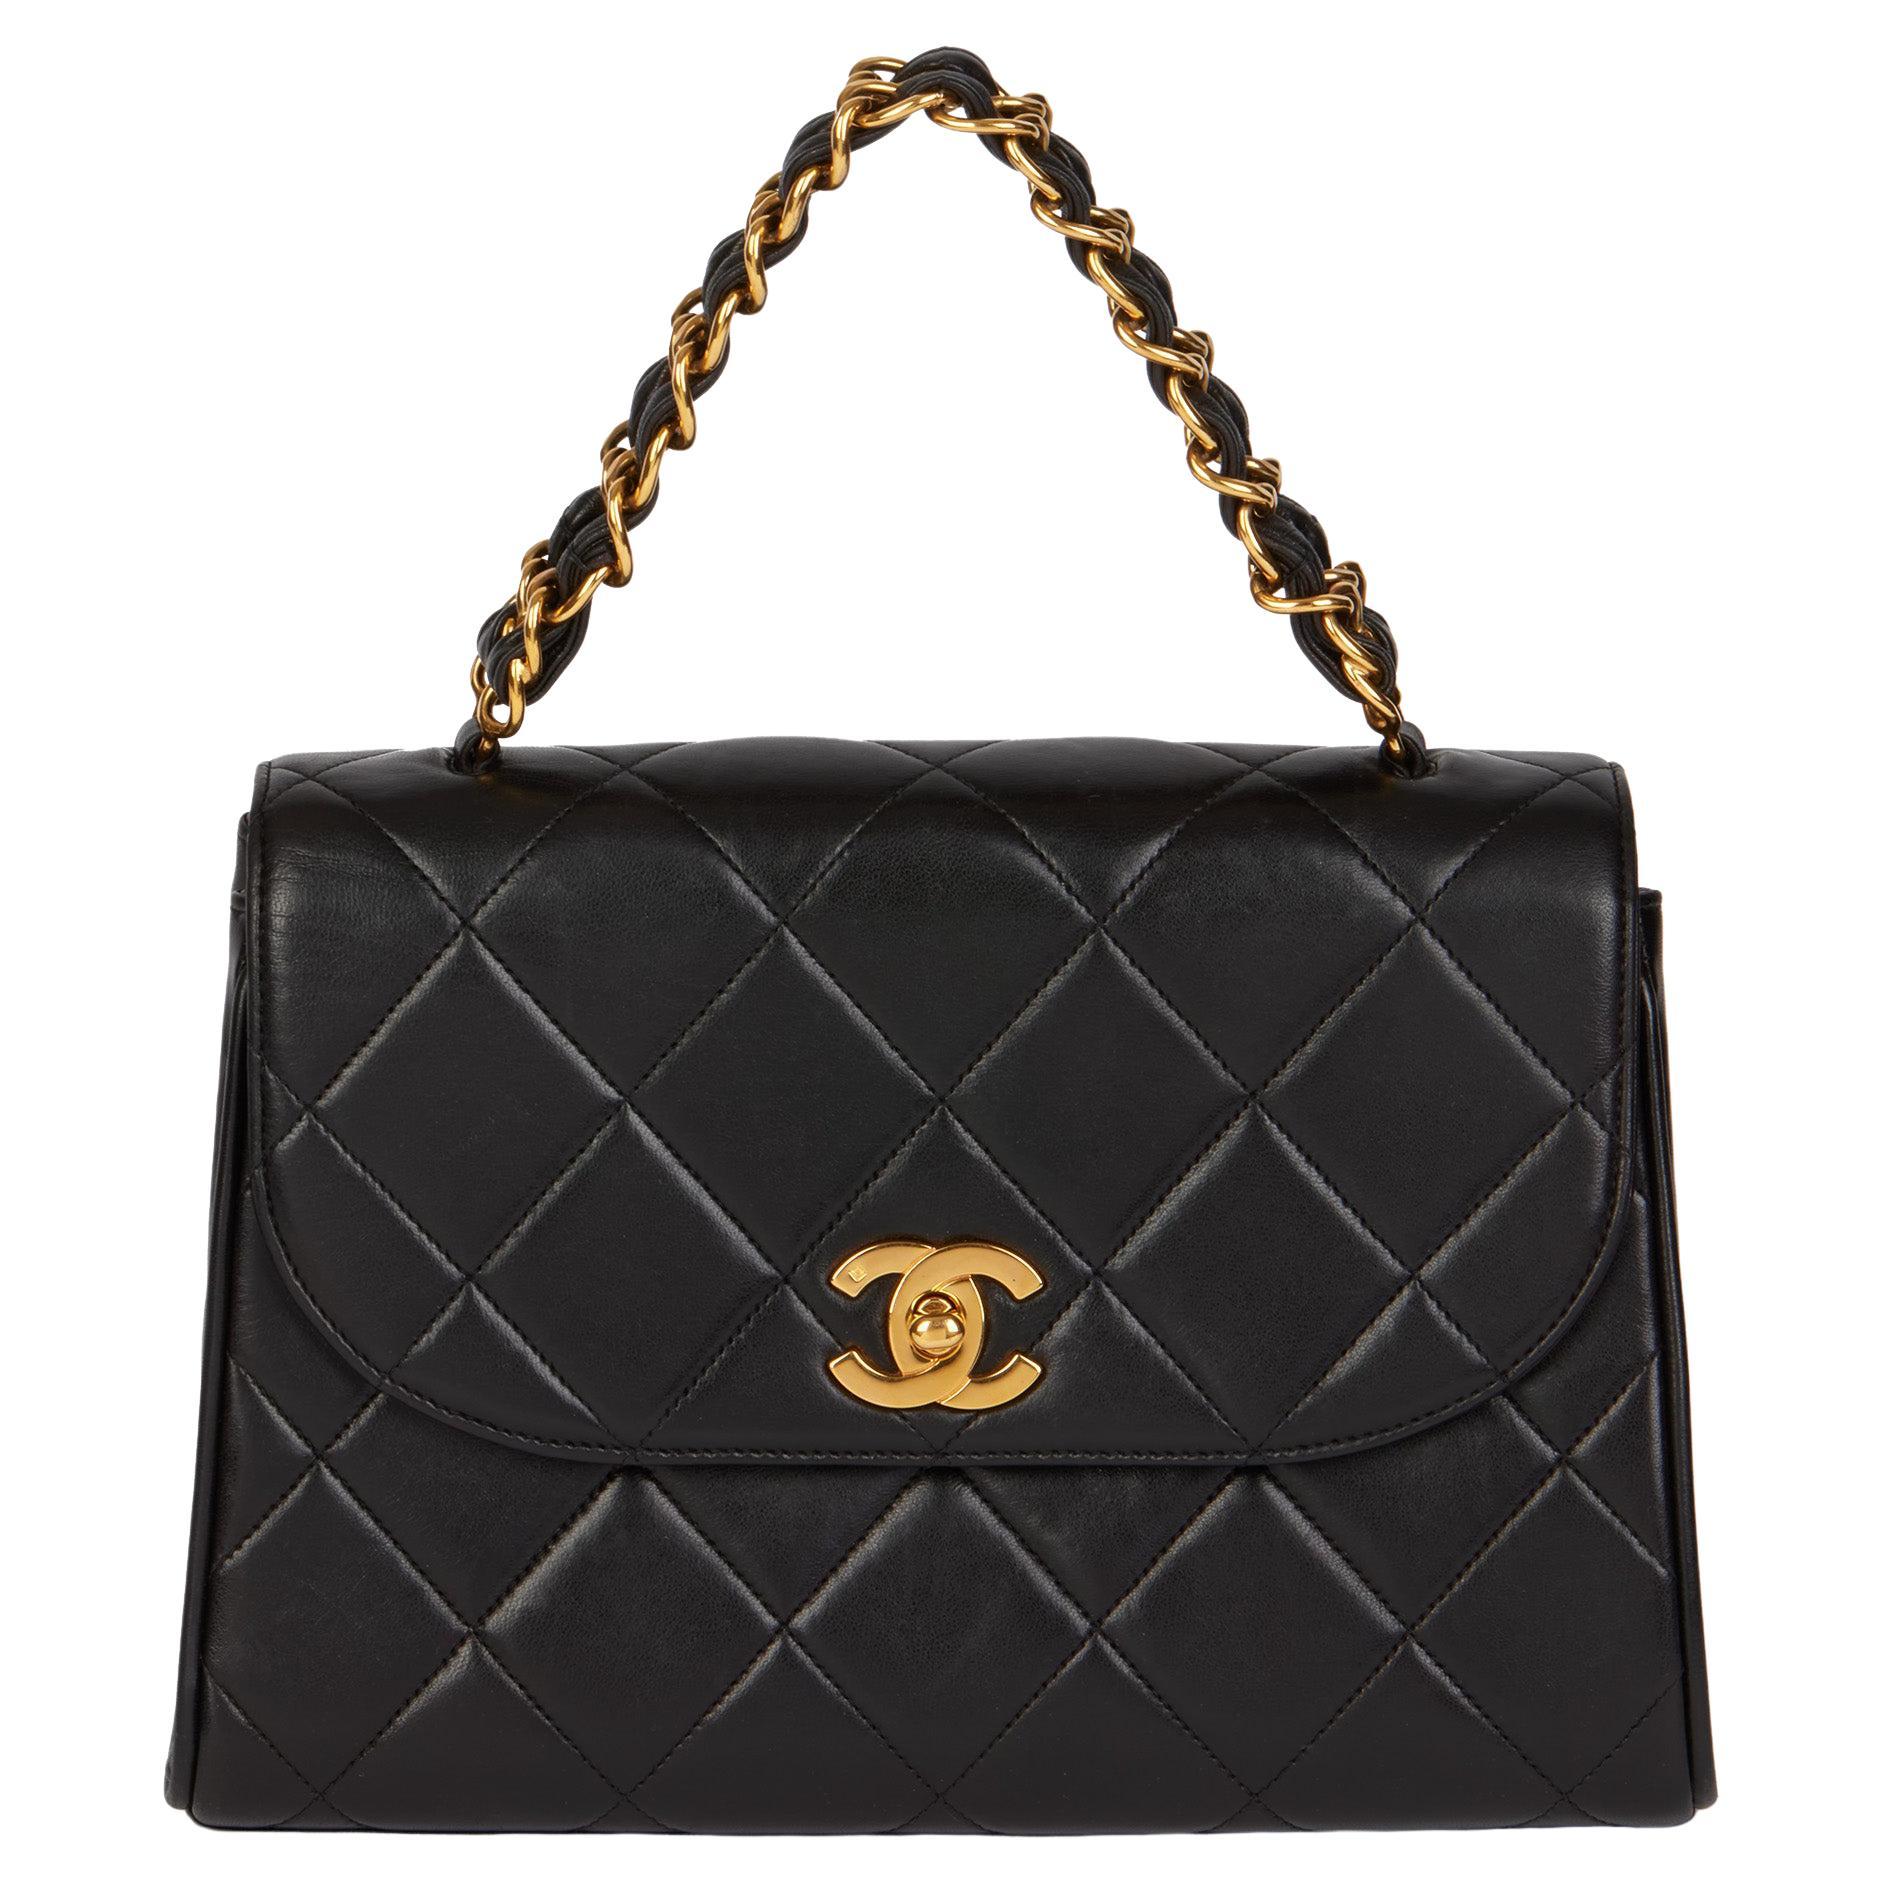 CHANEL Black Quilted Lambskin Vintage Medium Classic Top Handle